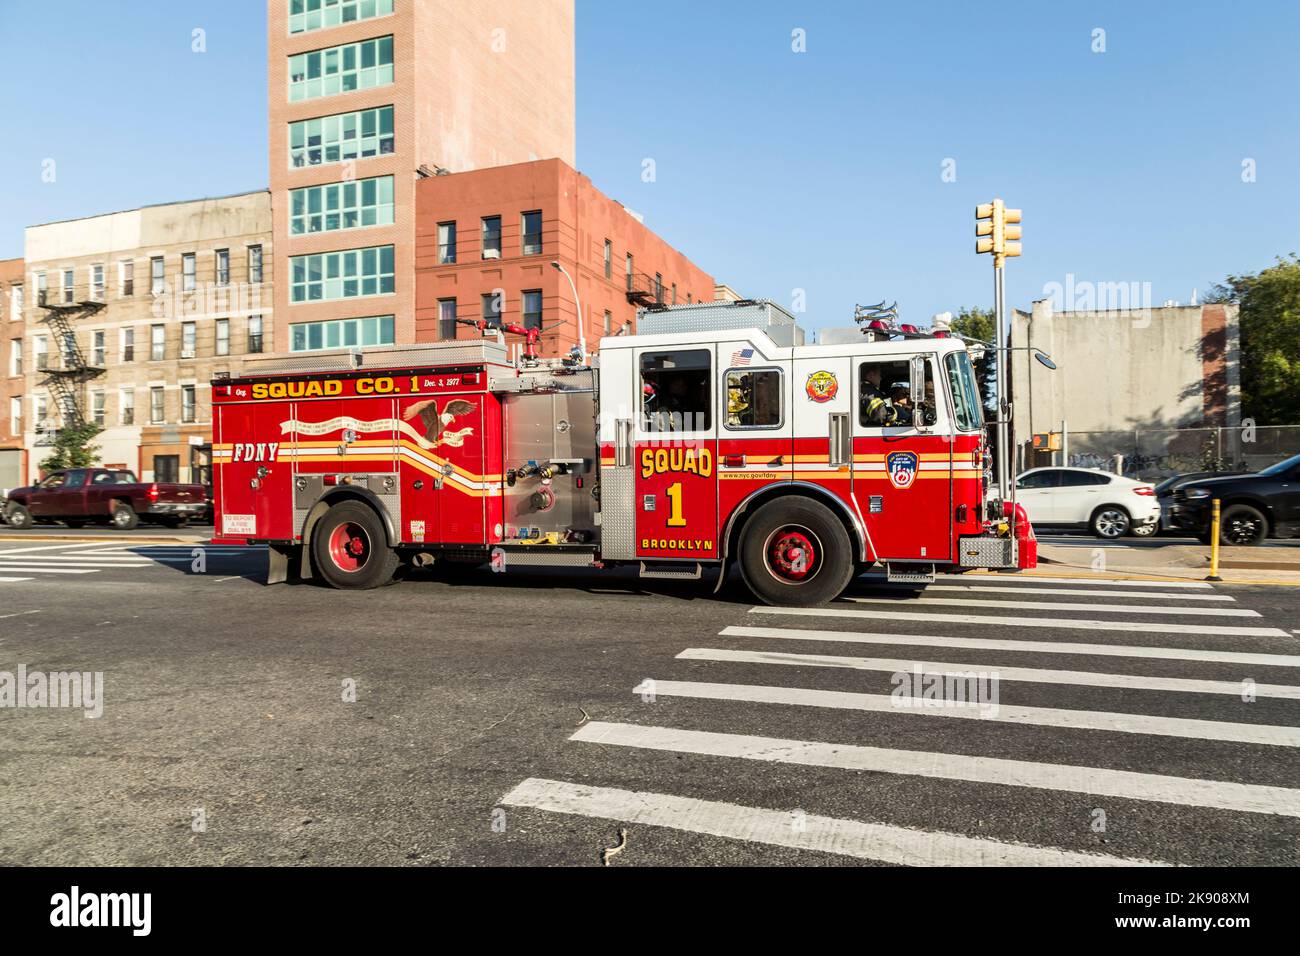 NEW YORK CITY, USA - OCT 20, 2015: fire brigade car at the street in Brooklyn, New York, USA. The car belongs to Squad 1 fire department, New York. Stock Photo